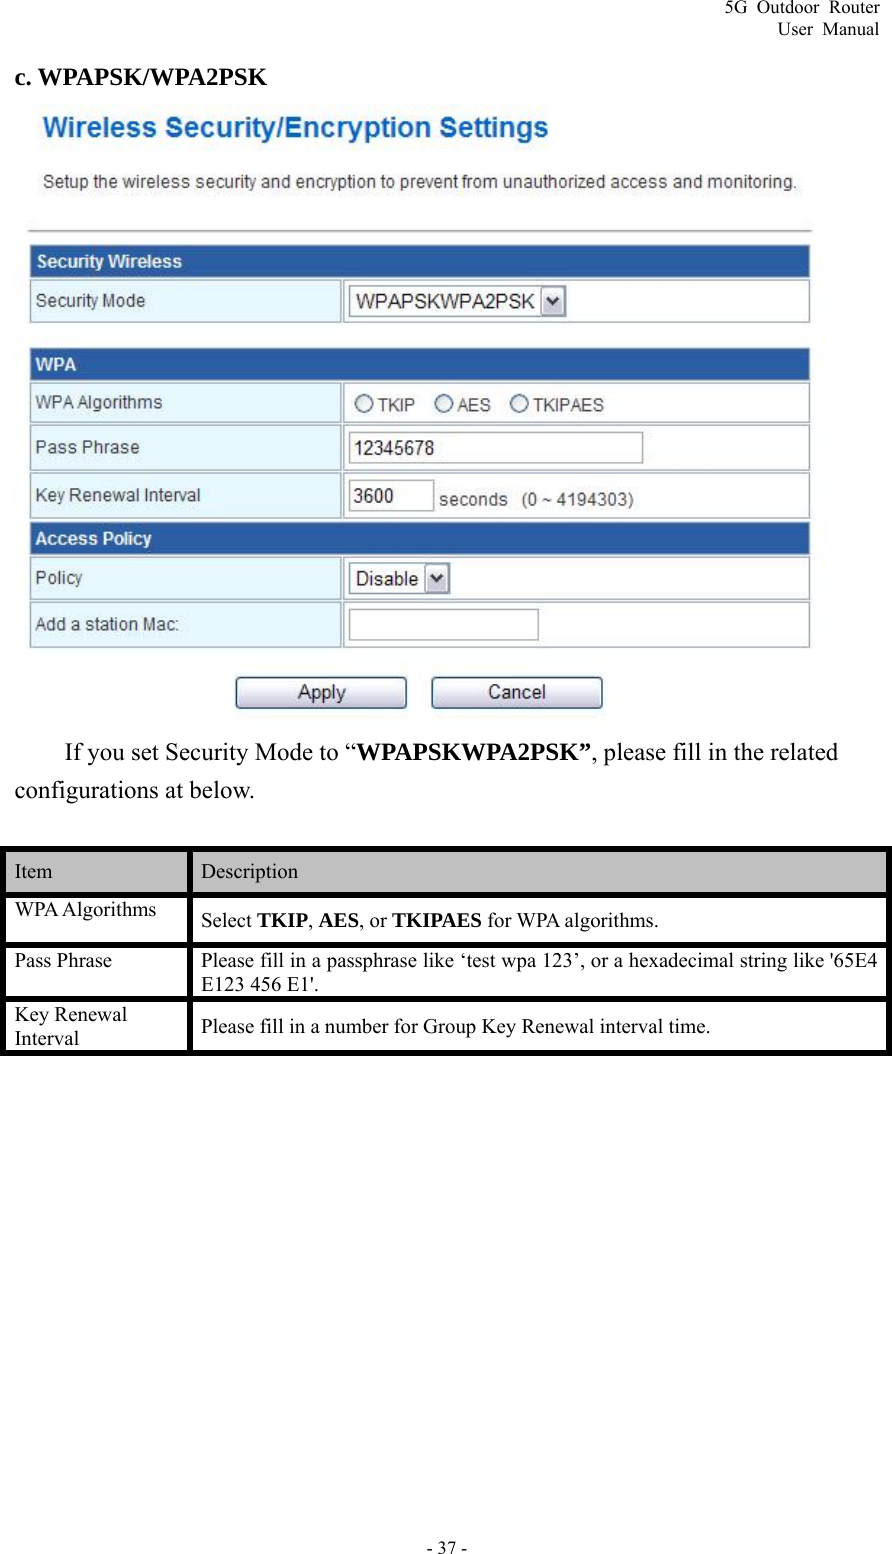 5G Outdoor Router User Manual - 37 - c. WPAPSK/WPA2PSK  If you set Security Mode to “WPAPSKWPA2PSK”, please fill in the related configurations at below.  Item   Description  WPA Algorithms  Select TKIP, AES, or TKIPAES for WPA algorithms. Pass Phrase  Please fill in a passphrase like ‘test wpa 123’, or a hexadecimal string like &apos;65E4 E123 456 E1&apos;. Key Renewal Interval Please fill in a number for Group Key Renewal interval time. 